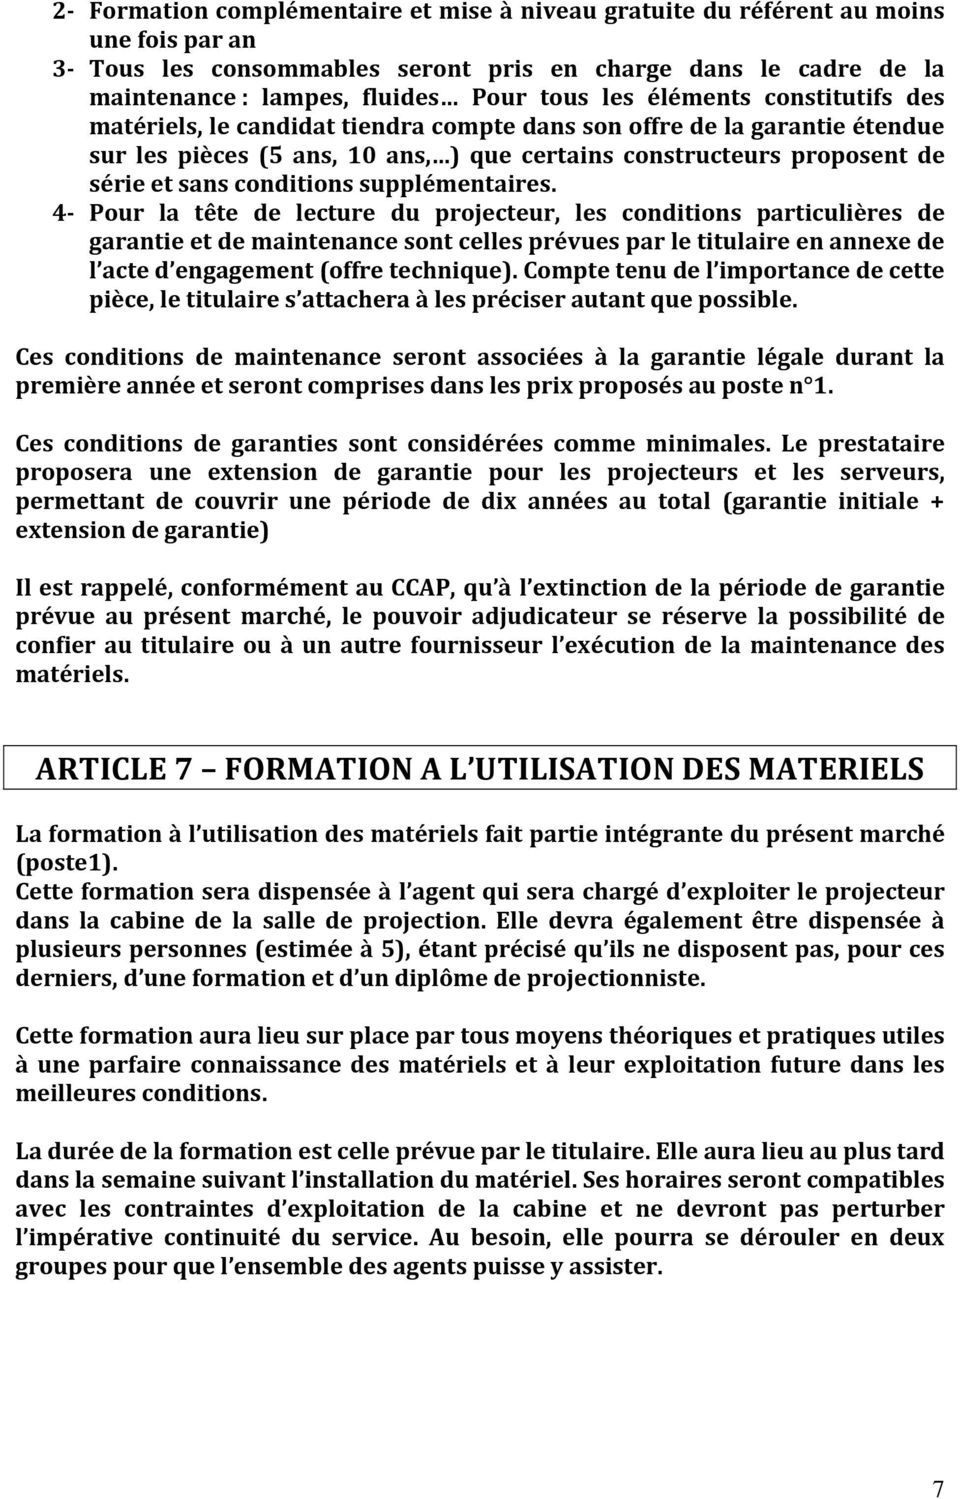 conditions supplémentaires.